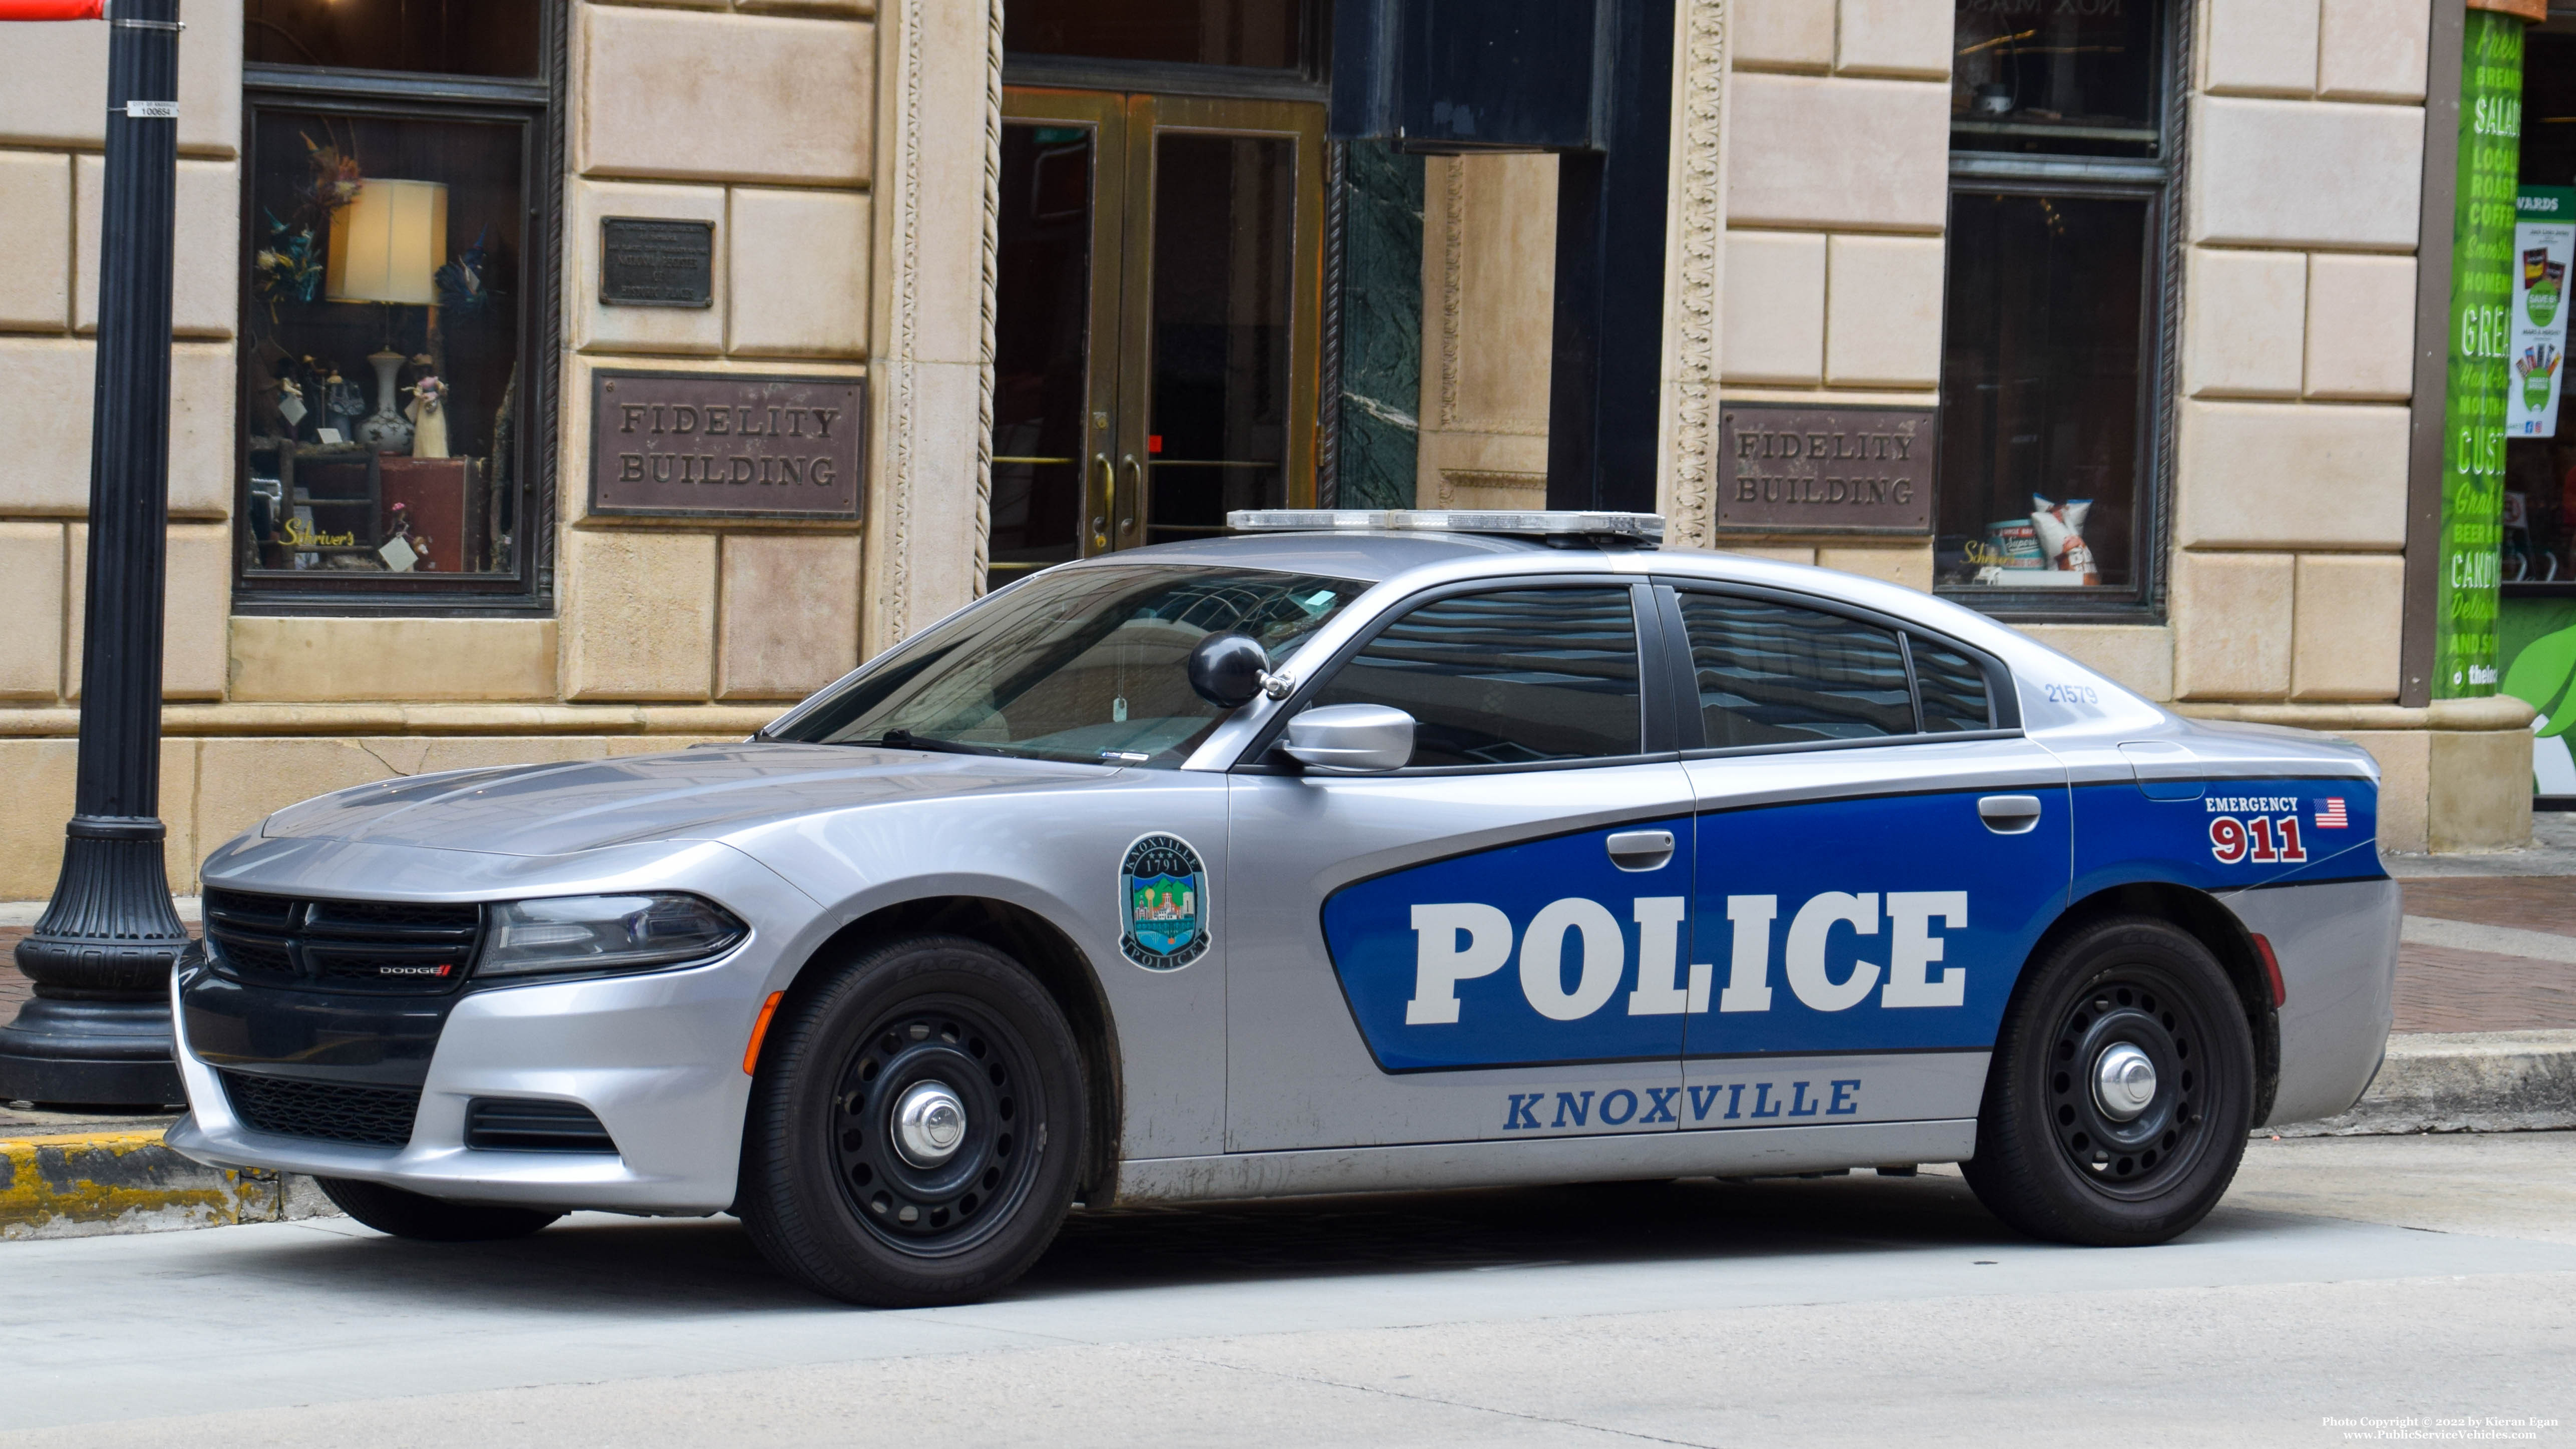 A photo  of Knoxville Police
            Cruiser 21579, a 2015-2019 Dodge Charger             taken by Kieran Egan